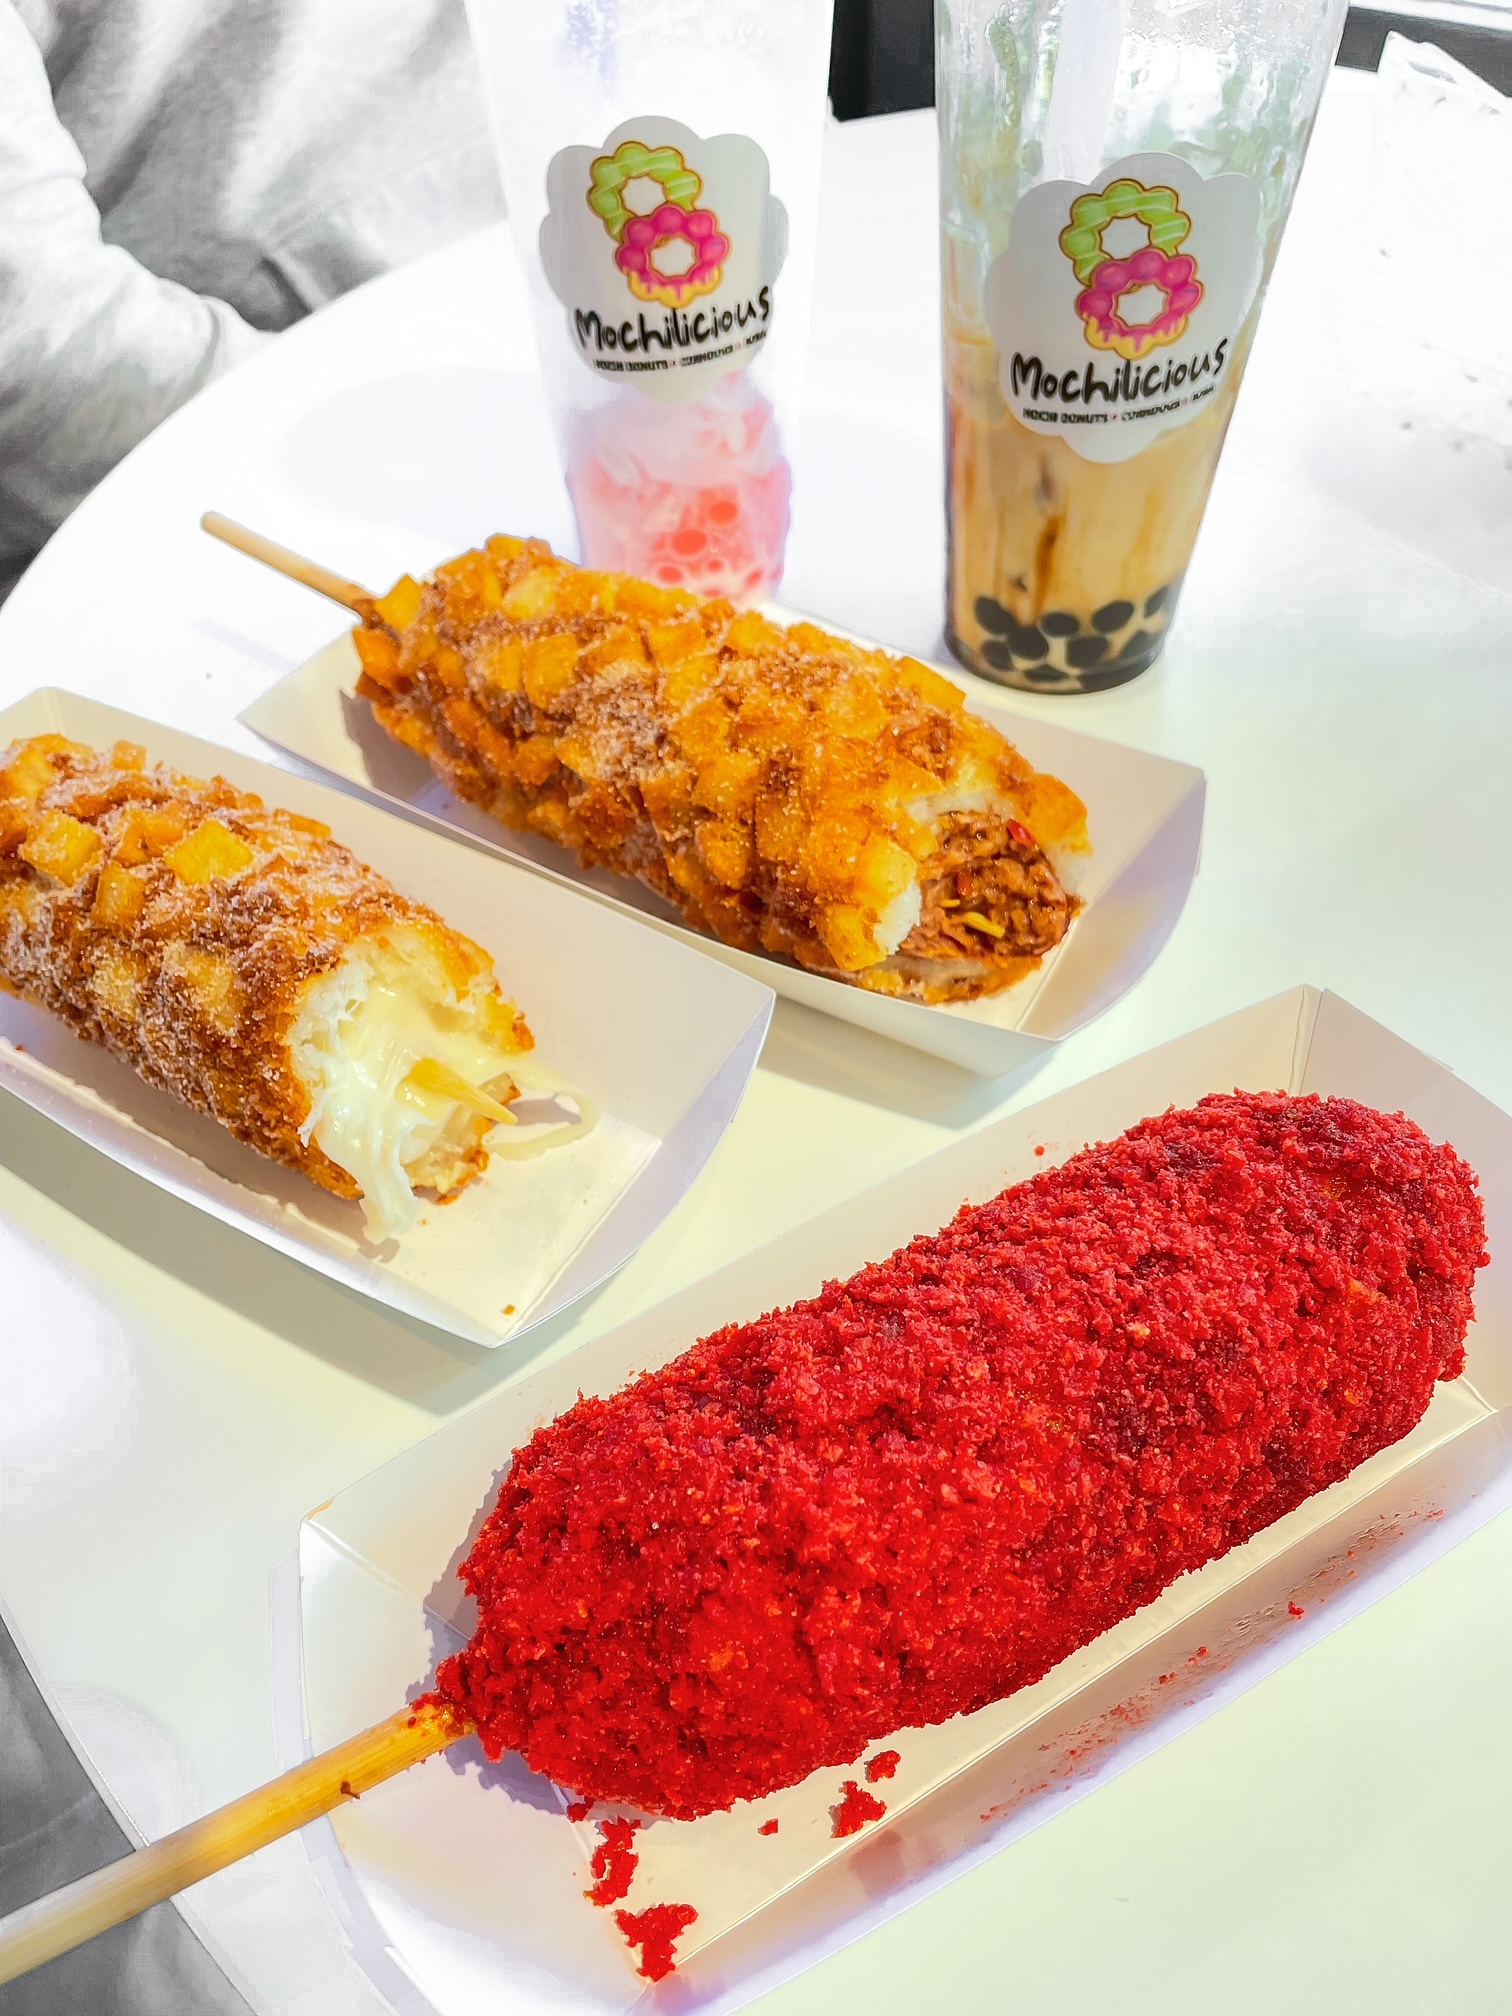 Korean-style corn dogs. Mochilicious takes this classic street food to a whole new level!